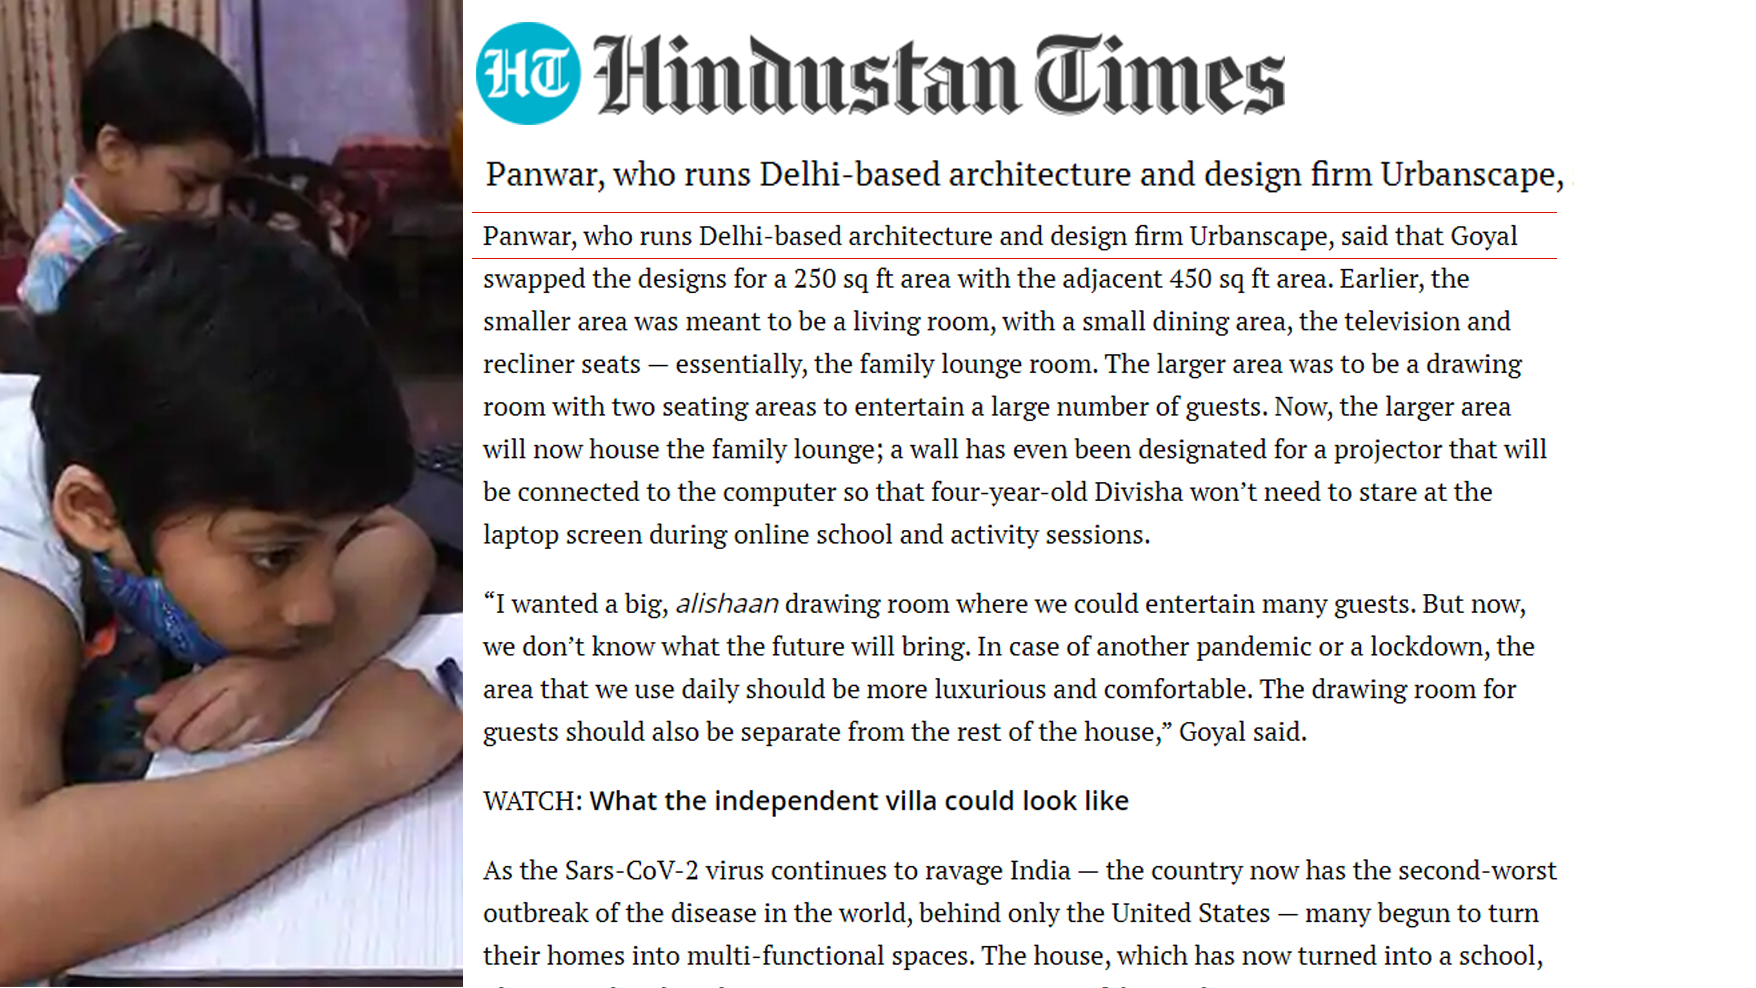 Hindustan Times Covers Urbanscape Architects